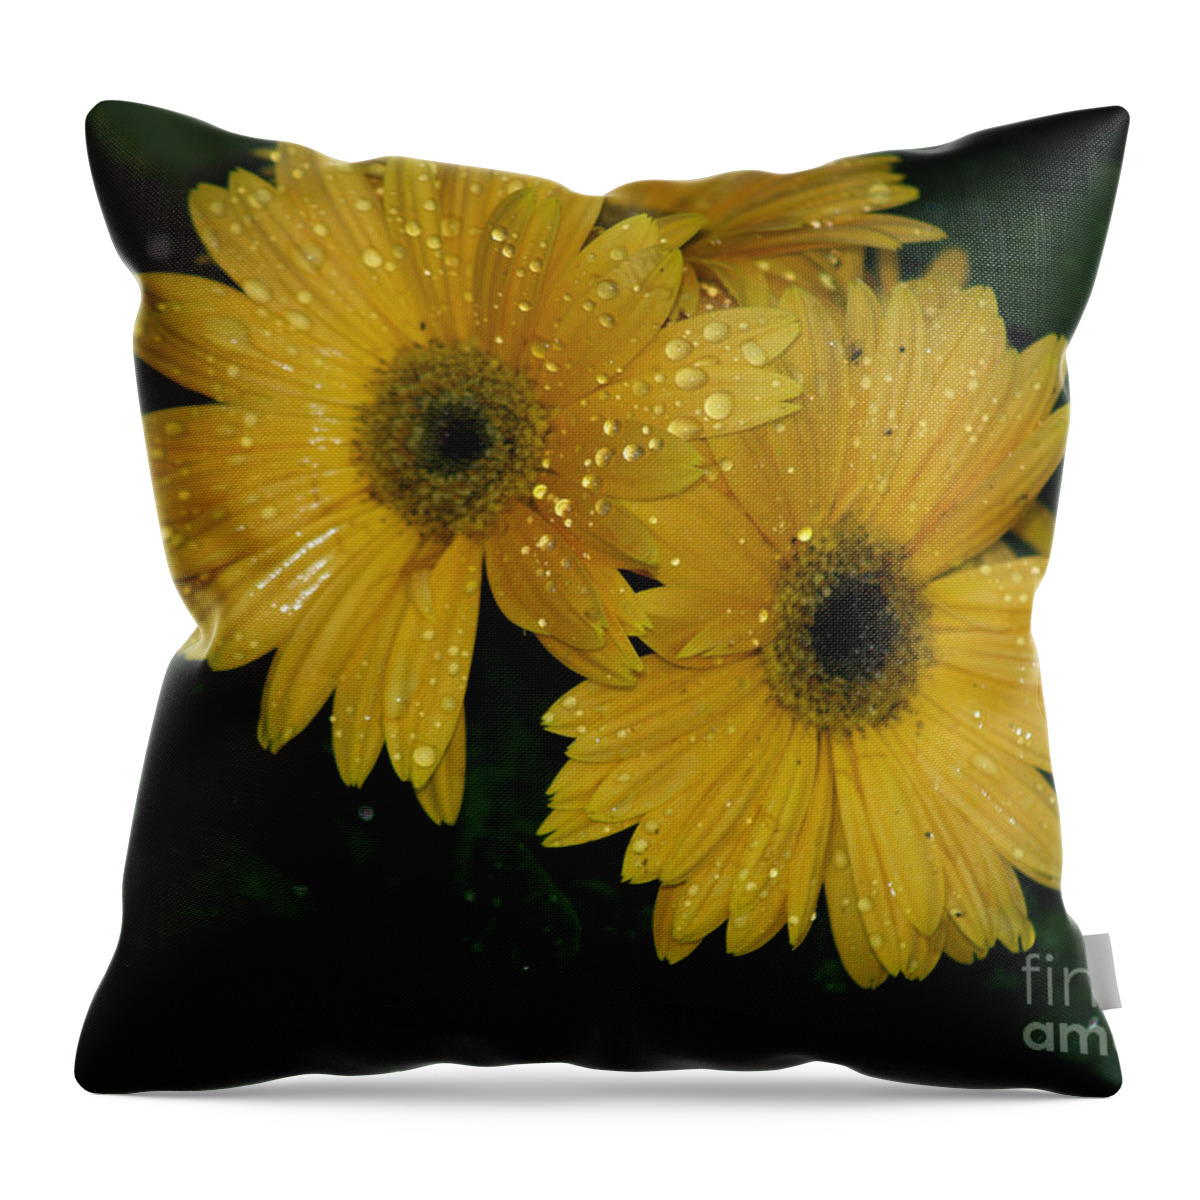 Yellow Gerber Daisies Throw Pillow featuring the photograph Water Droplets on Yellow Gerber Daisies by Robin Pedrero